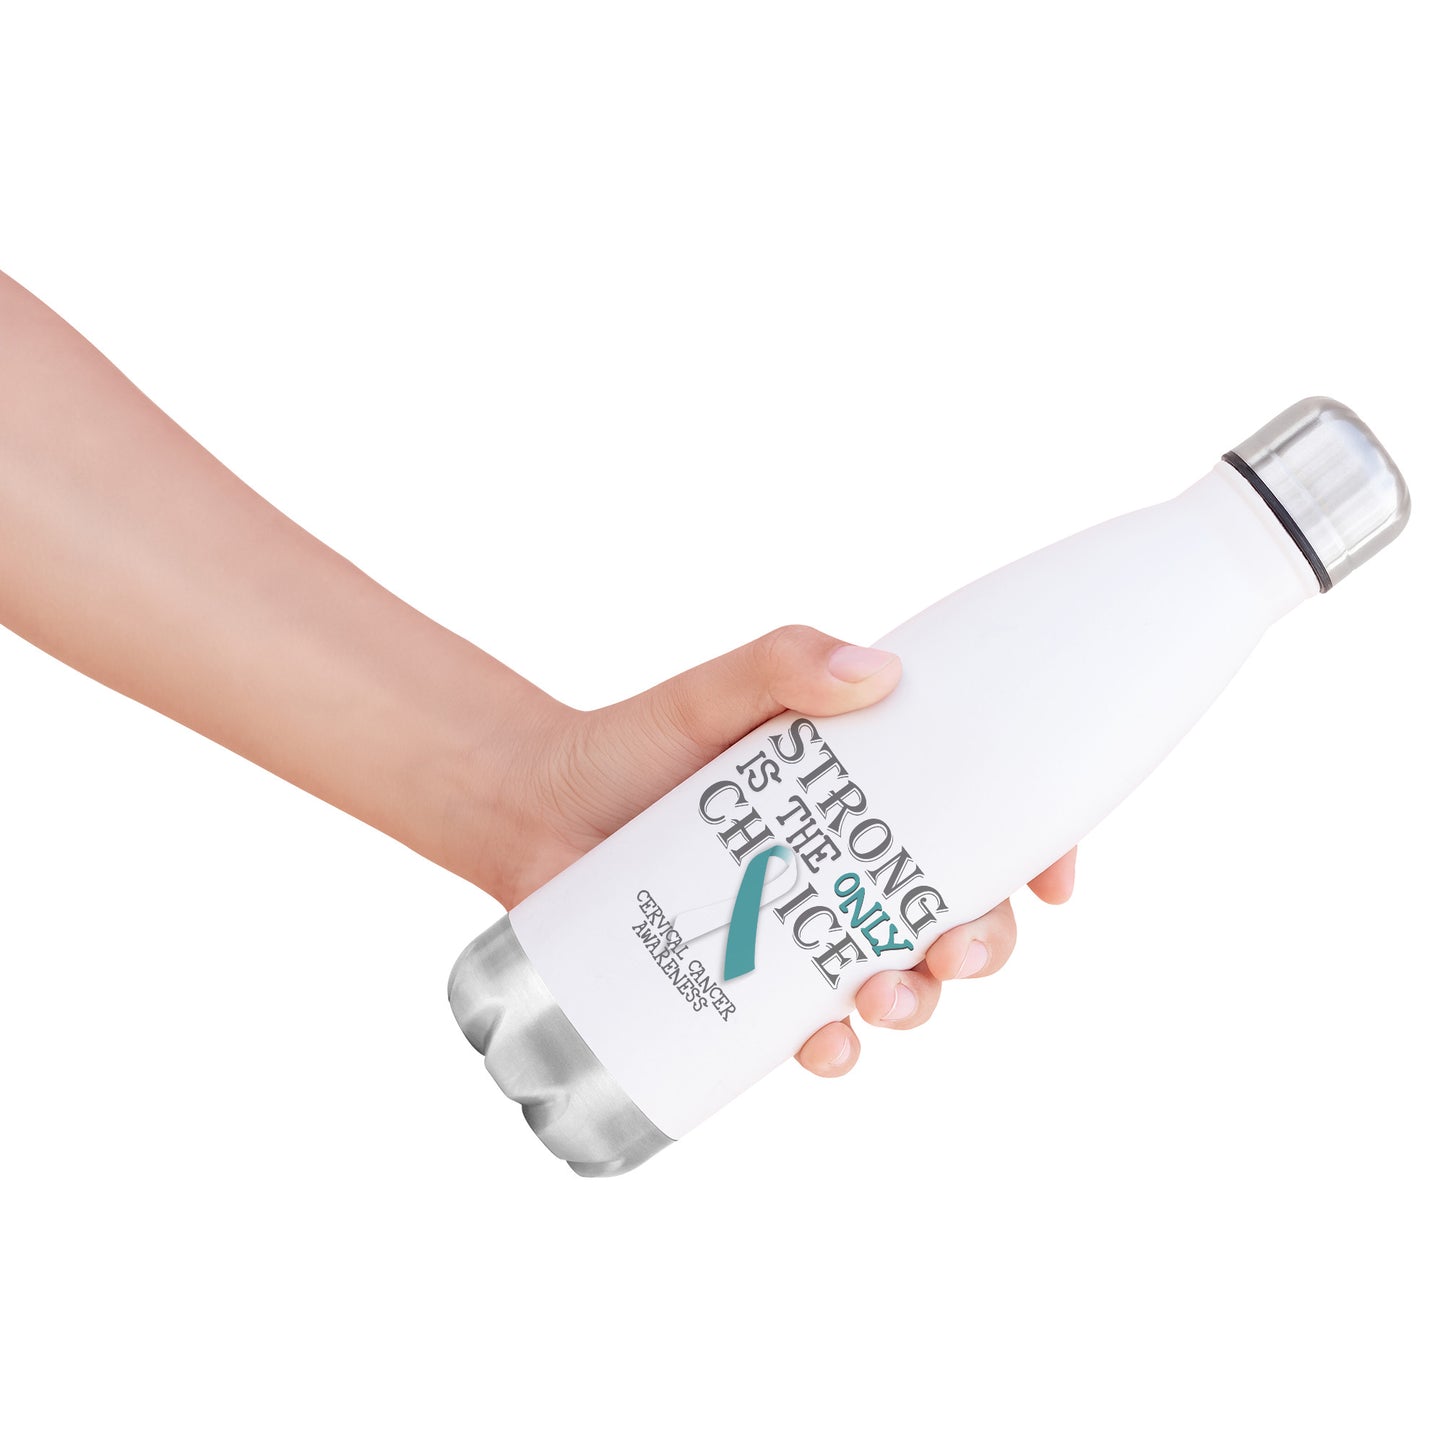 Strong is the Only Choice -Cervical Cancer Awareness 20oz Insulated Water Bottle